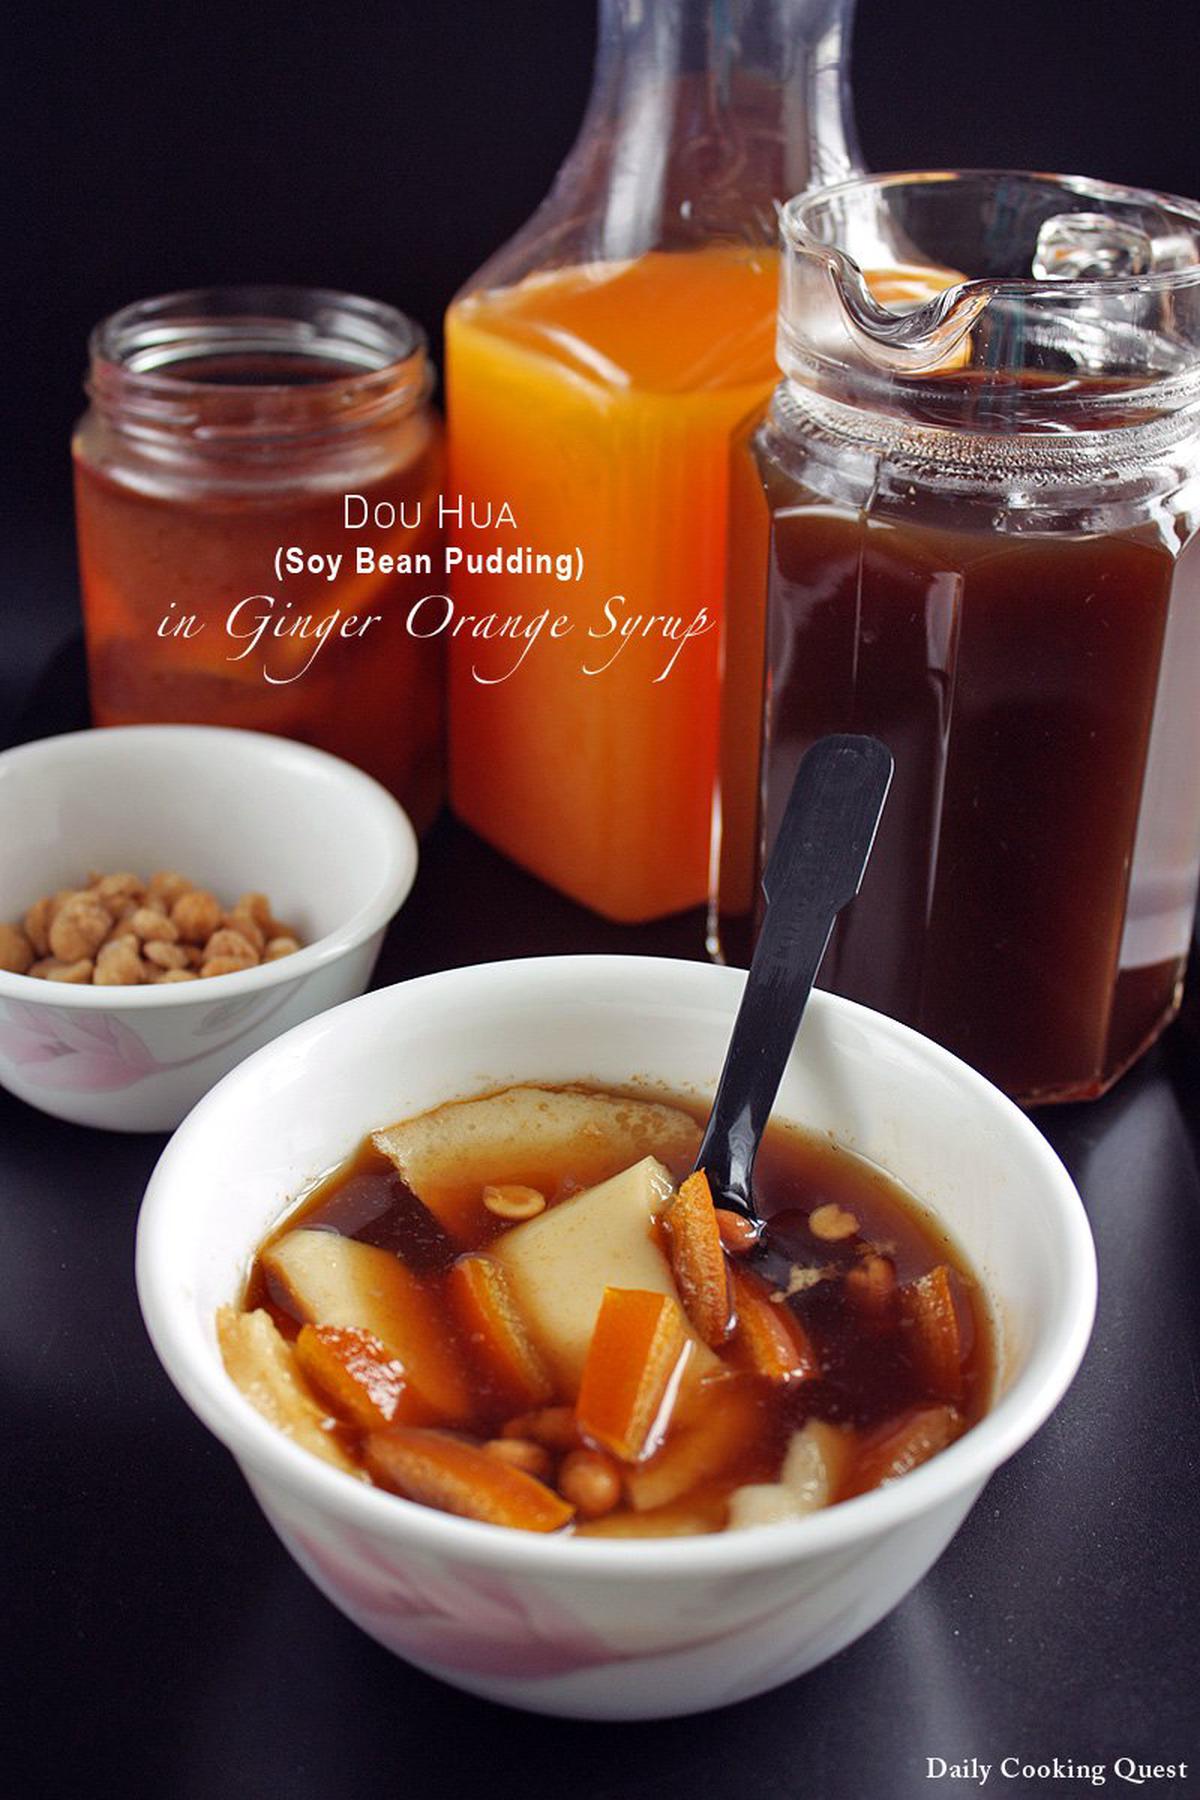 Dou Hua (Soy Bean Pudding) in Ginger Orange Syrup